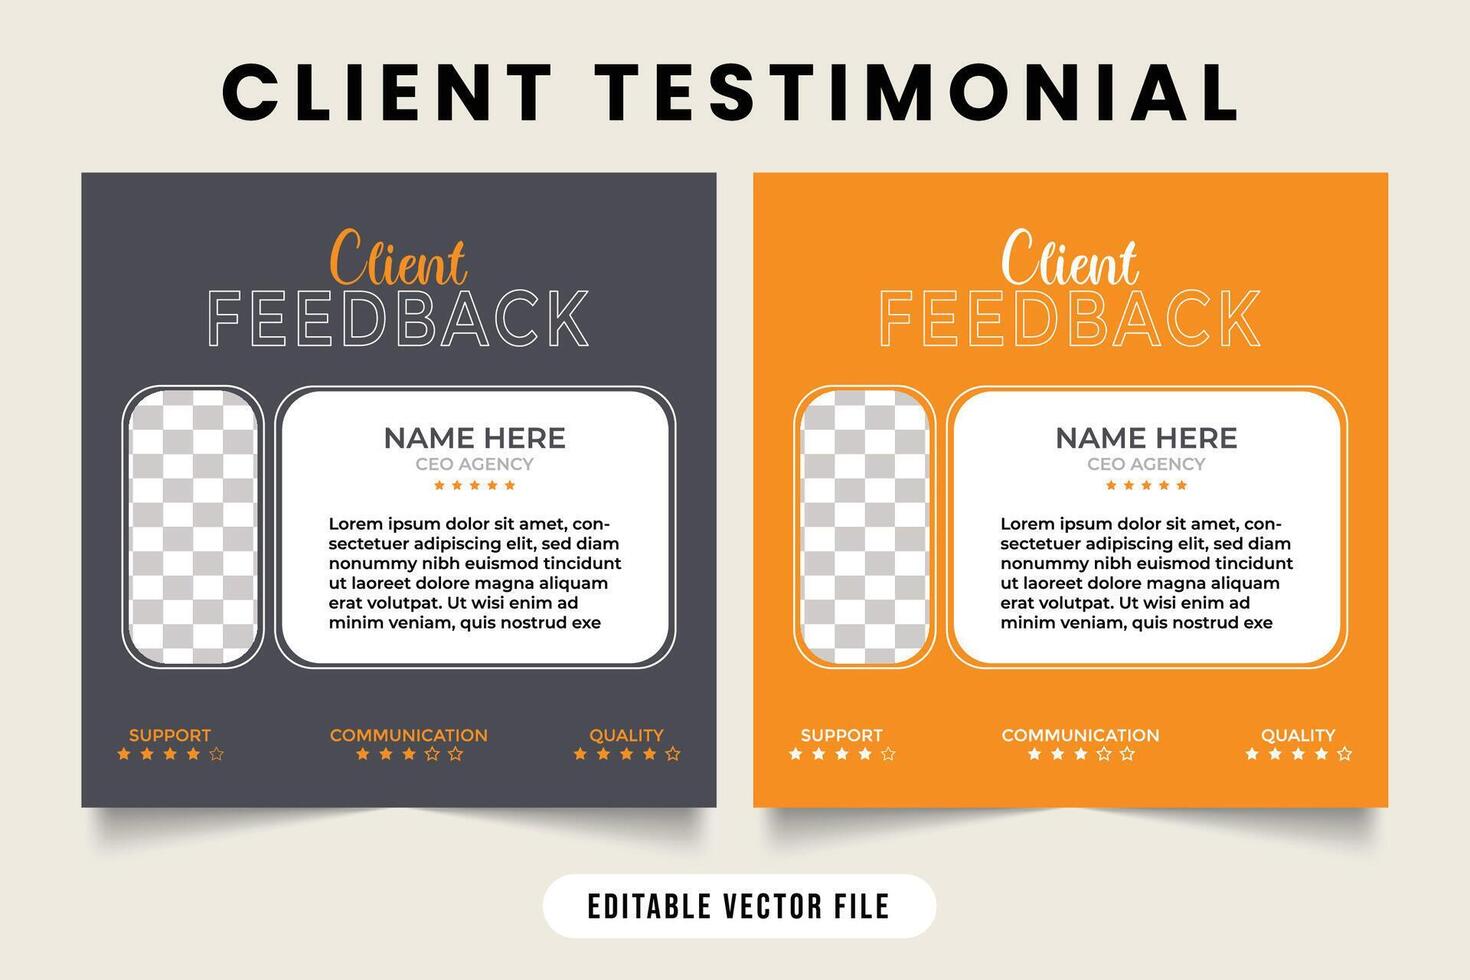 Client testimonial design with dark gray and yellow colors. customer feedback review or testimonial layout template for websites business. client testimonials vector with photo placeholder.